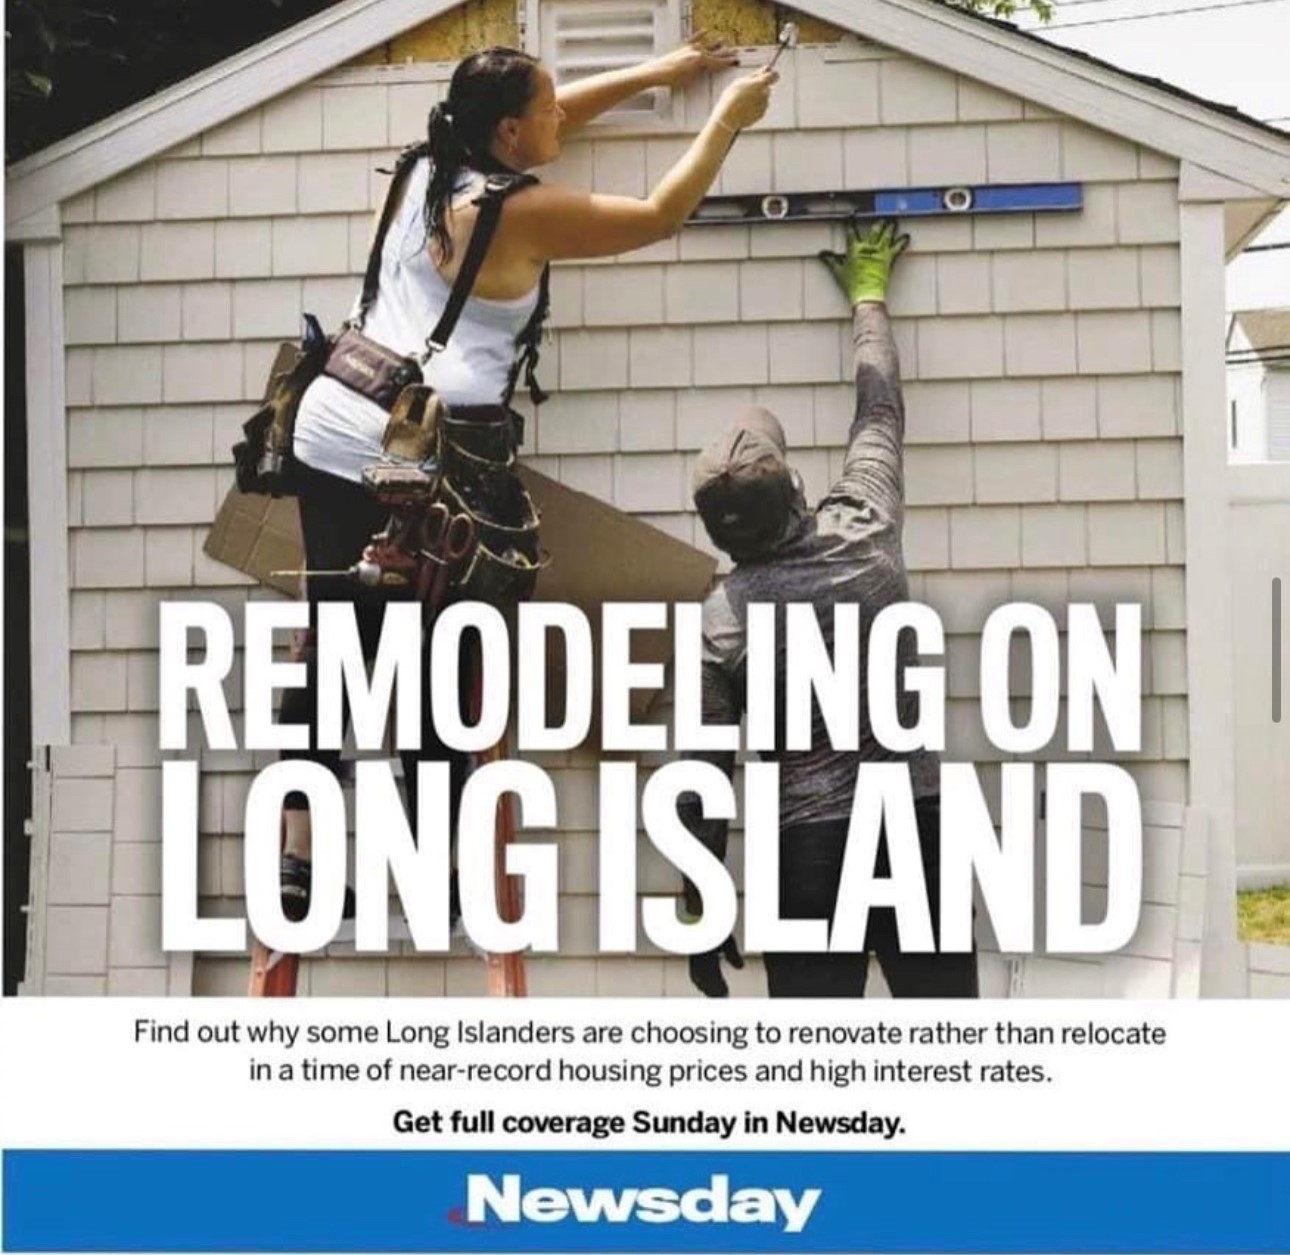 Remodeling on Long Island: Tough housing market leads homeowners to stay put and expand